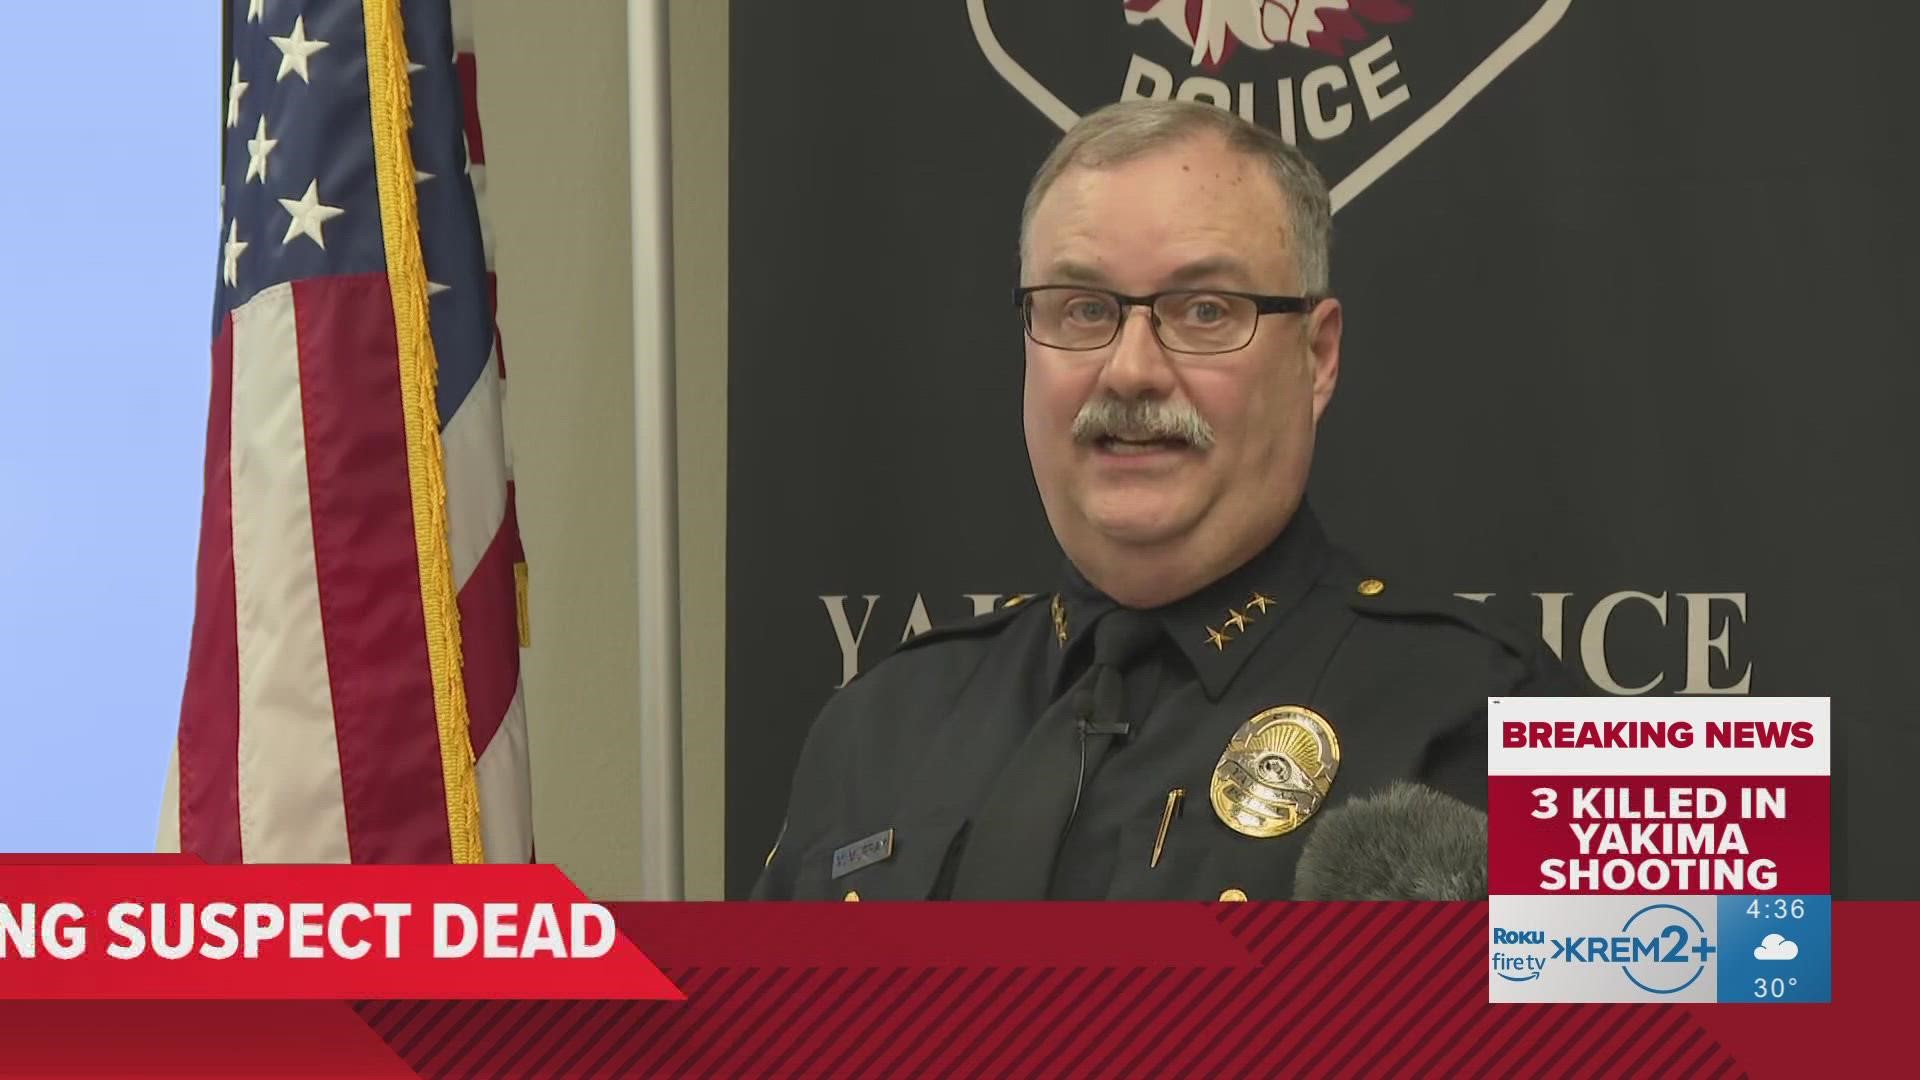 The chief also mentioned that a handgun and what he described as a large amount of ammunition were recovered near the deceased suspect.